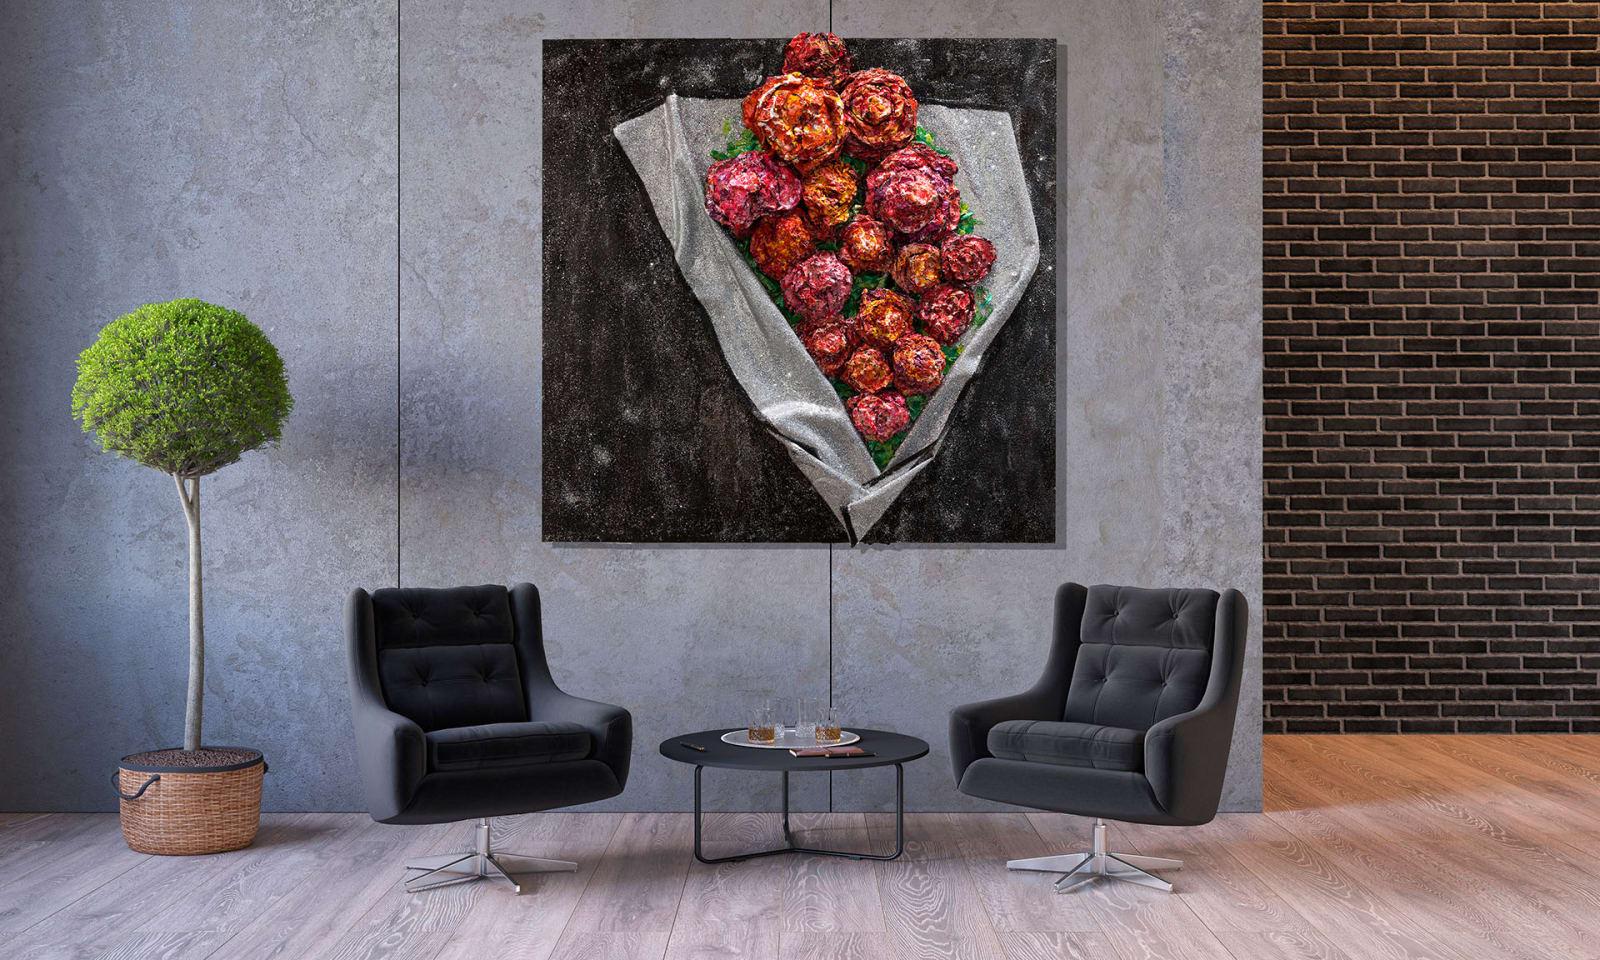 Unveil My Heart takes shape beautifully in three-dimensional glory. The black ground looks superb, and the roses come to life at great outward depth. This piece is 60